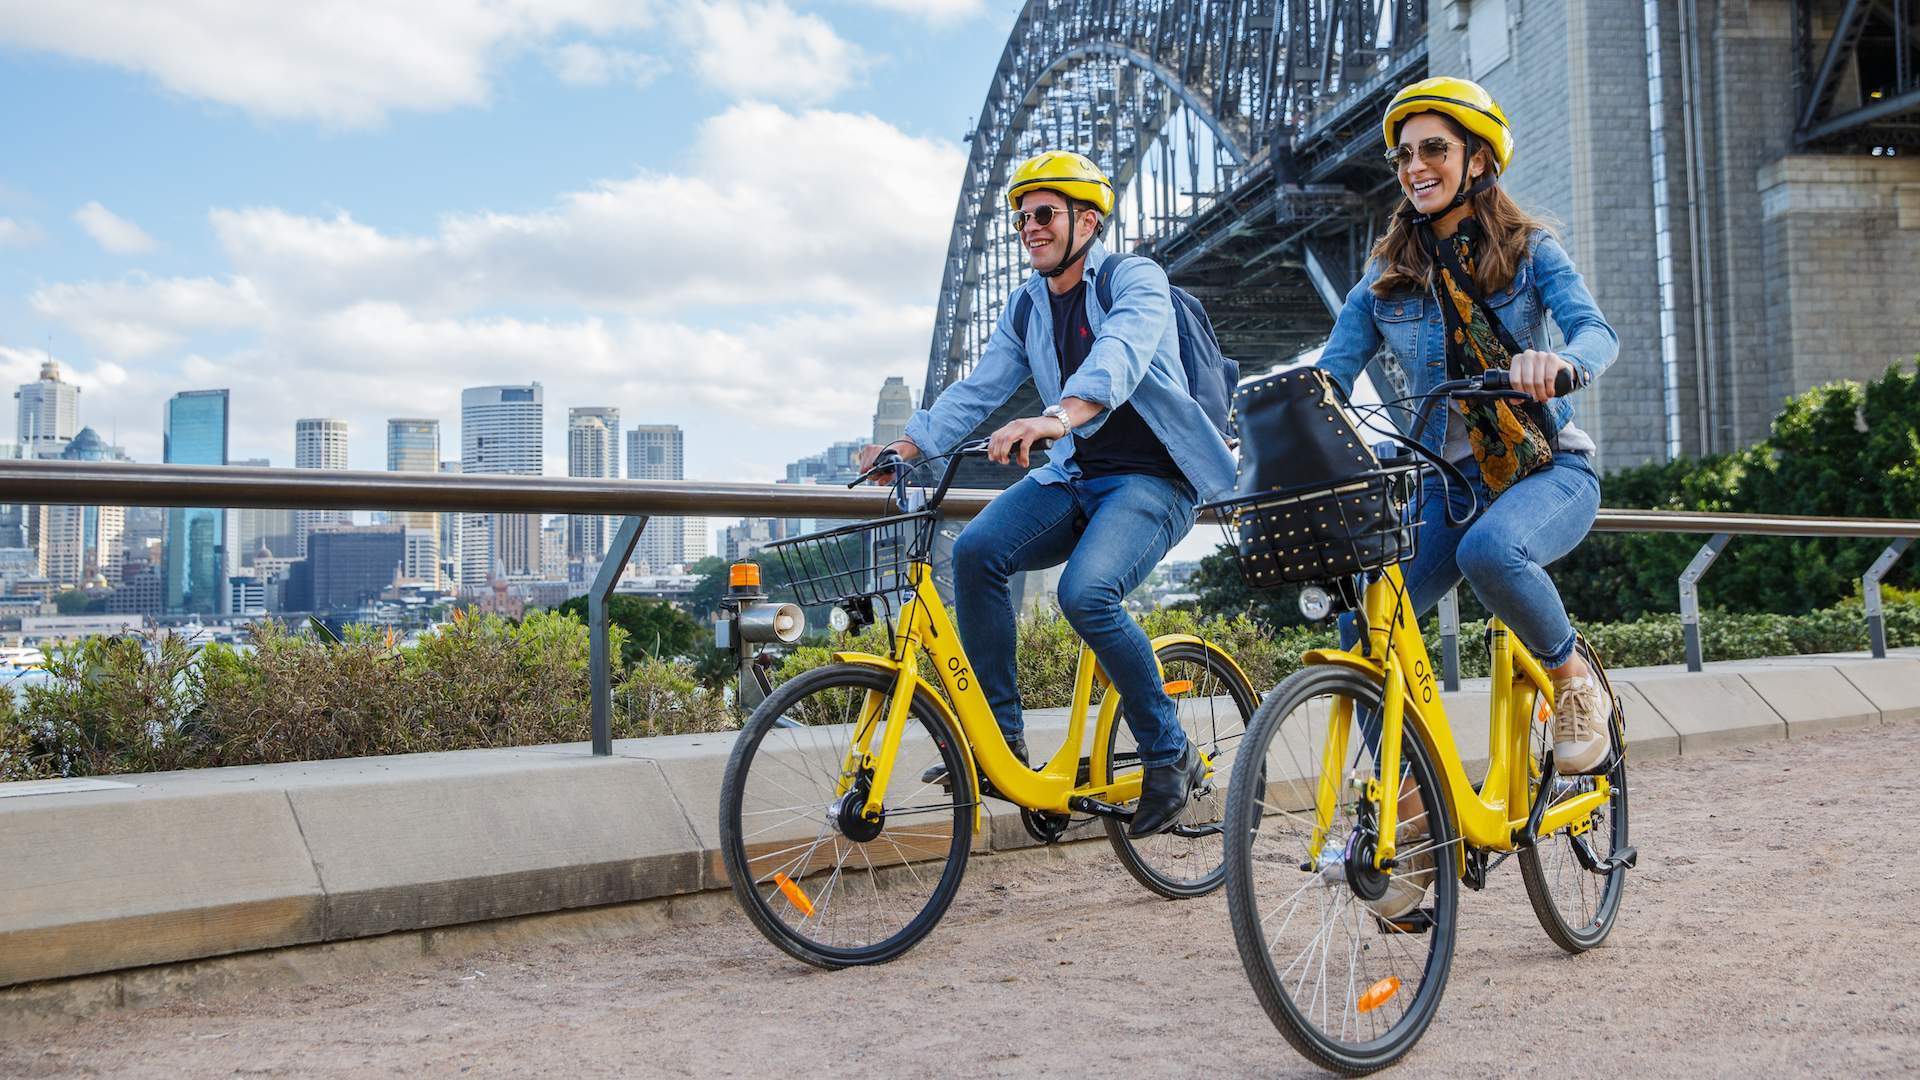 Bike Share Service Ofo is Raising Funds for OzHarvest